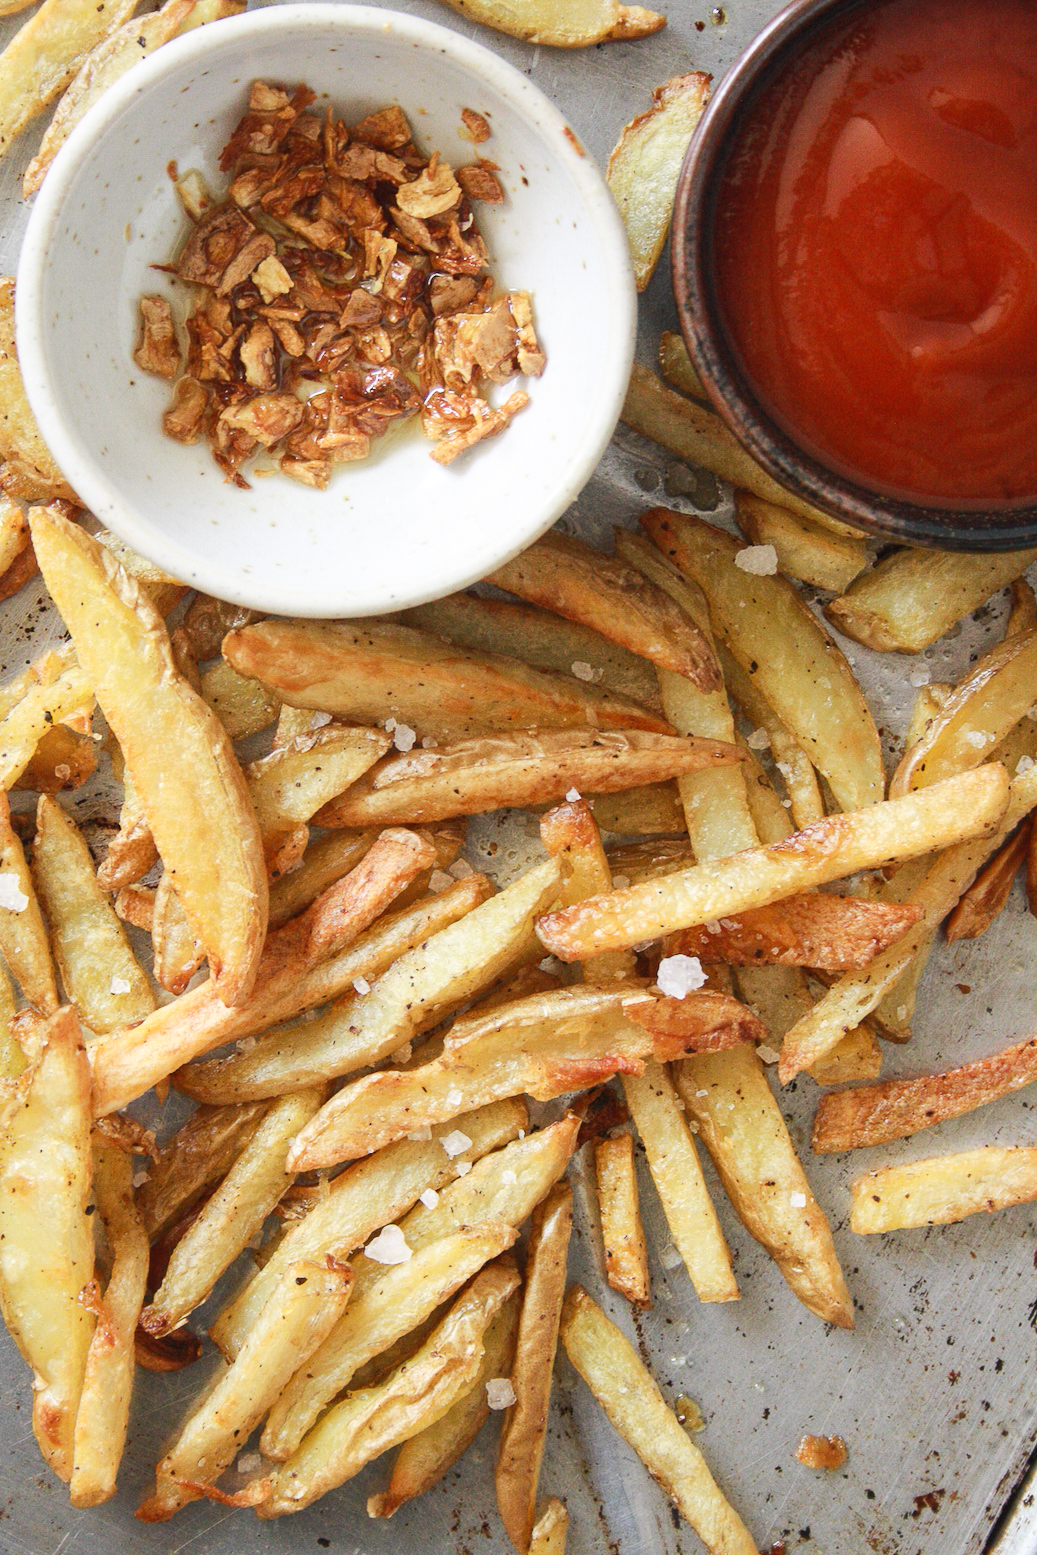 Crispy, salty fries with lots of garlic, baked not fried!